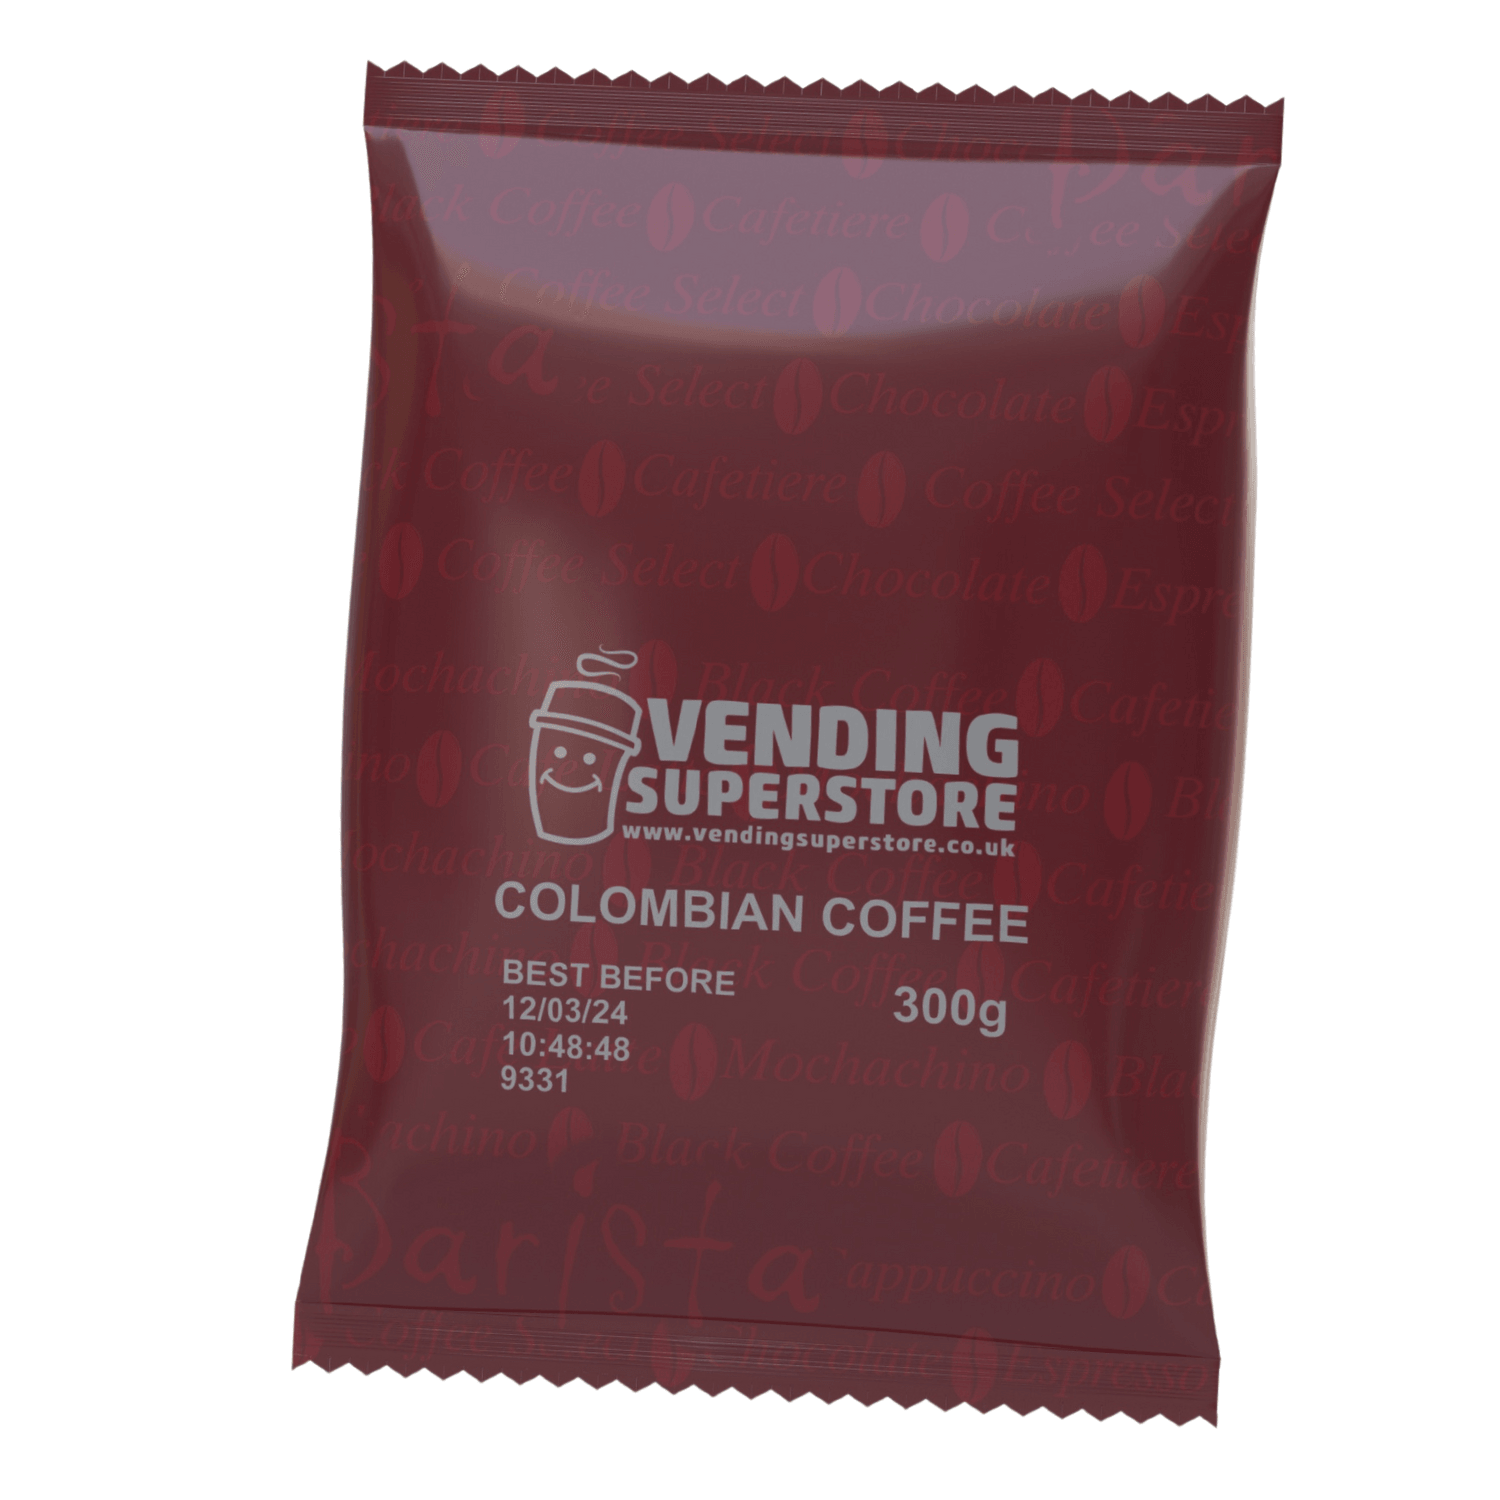 Vending Superstore Colombian Blend Vending Coffee - 300g Bags or Full Case - Vending Superstore